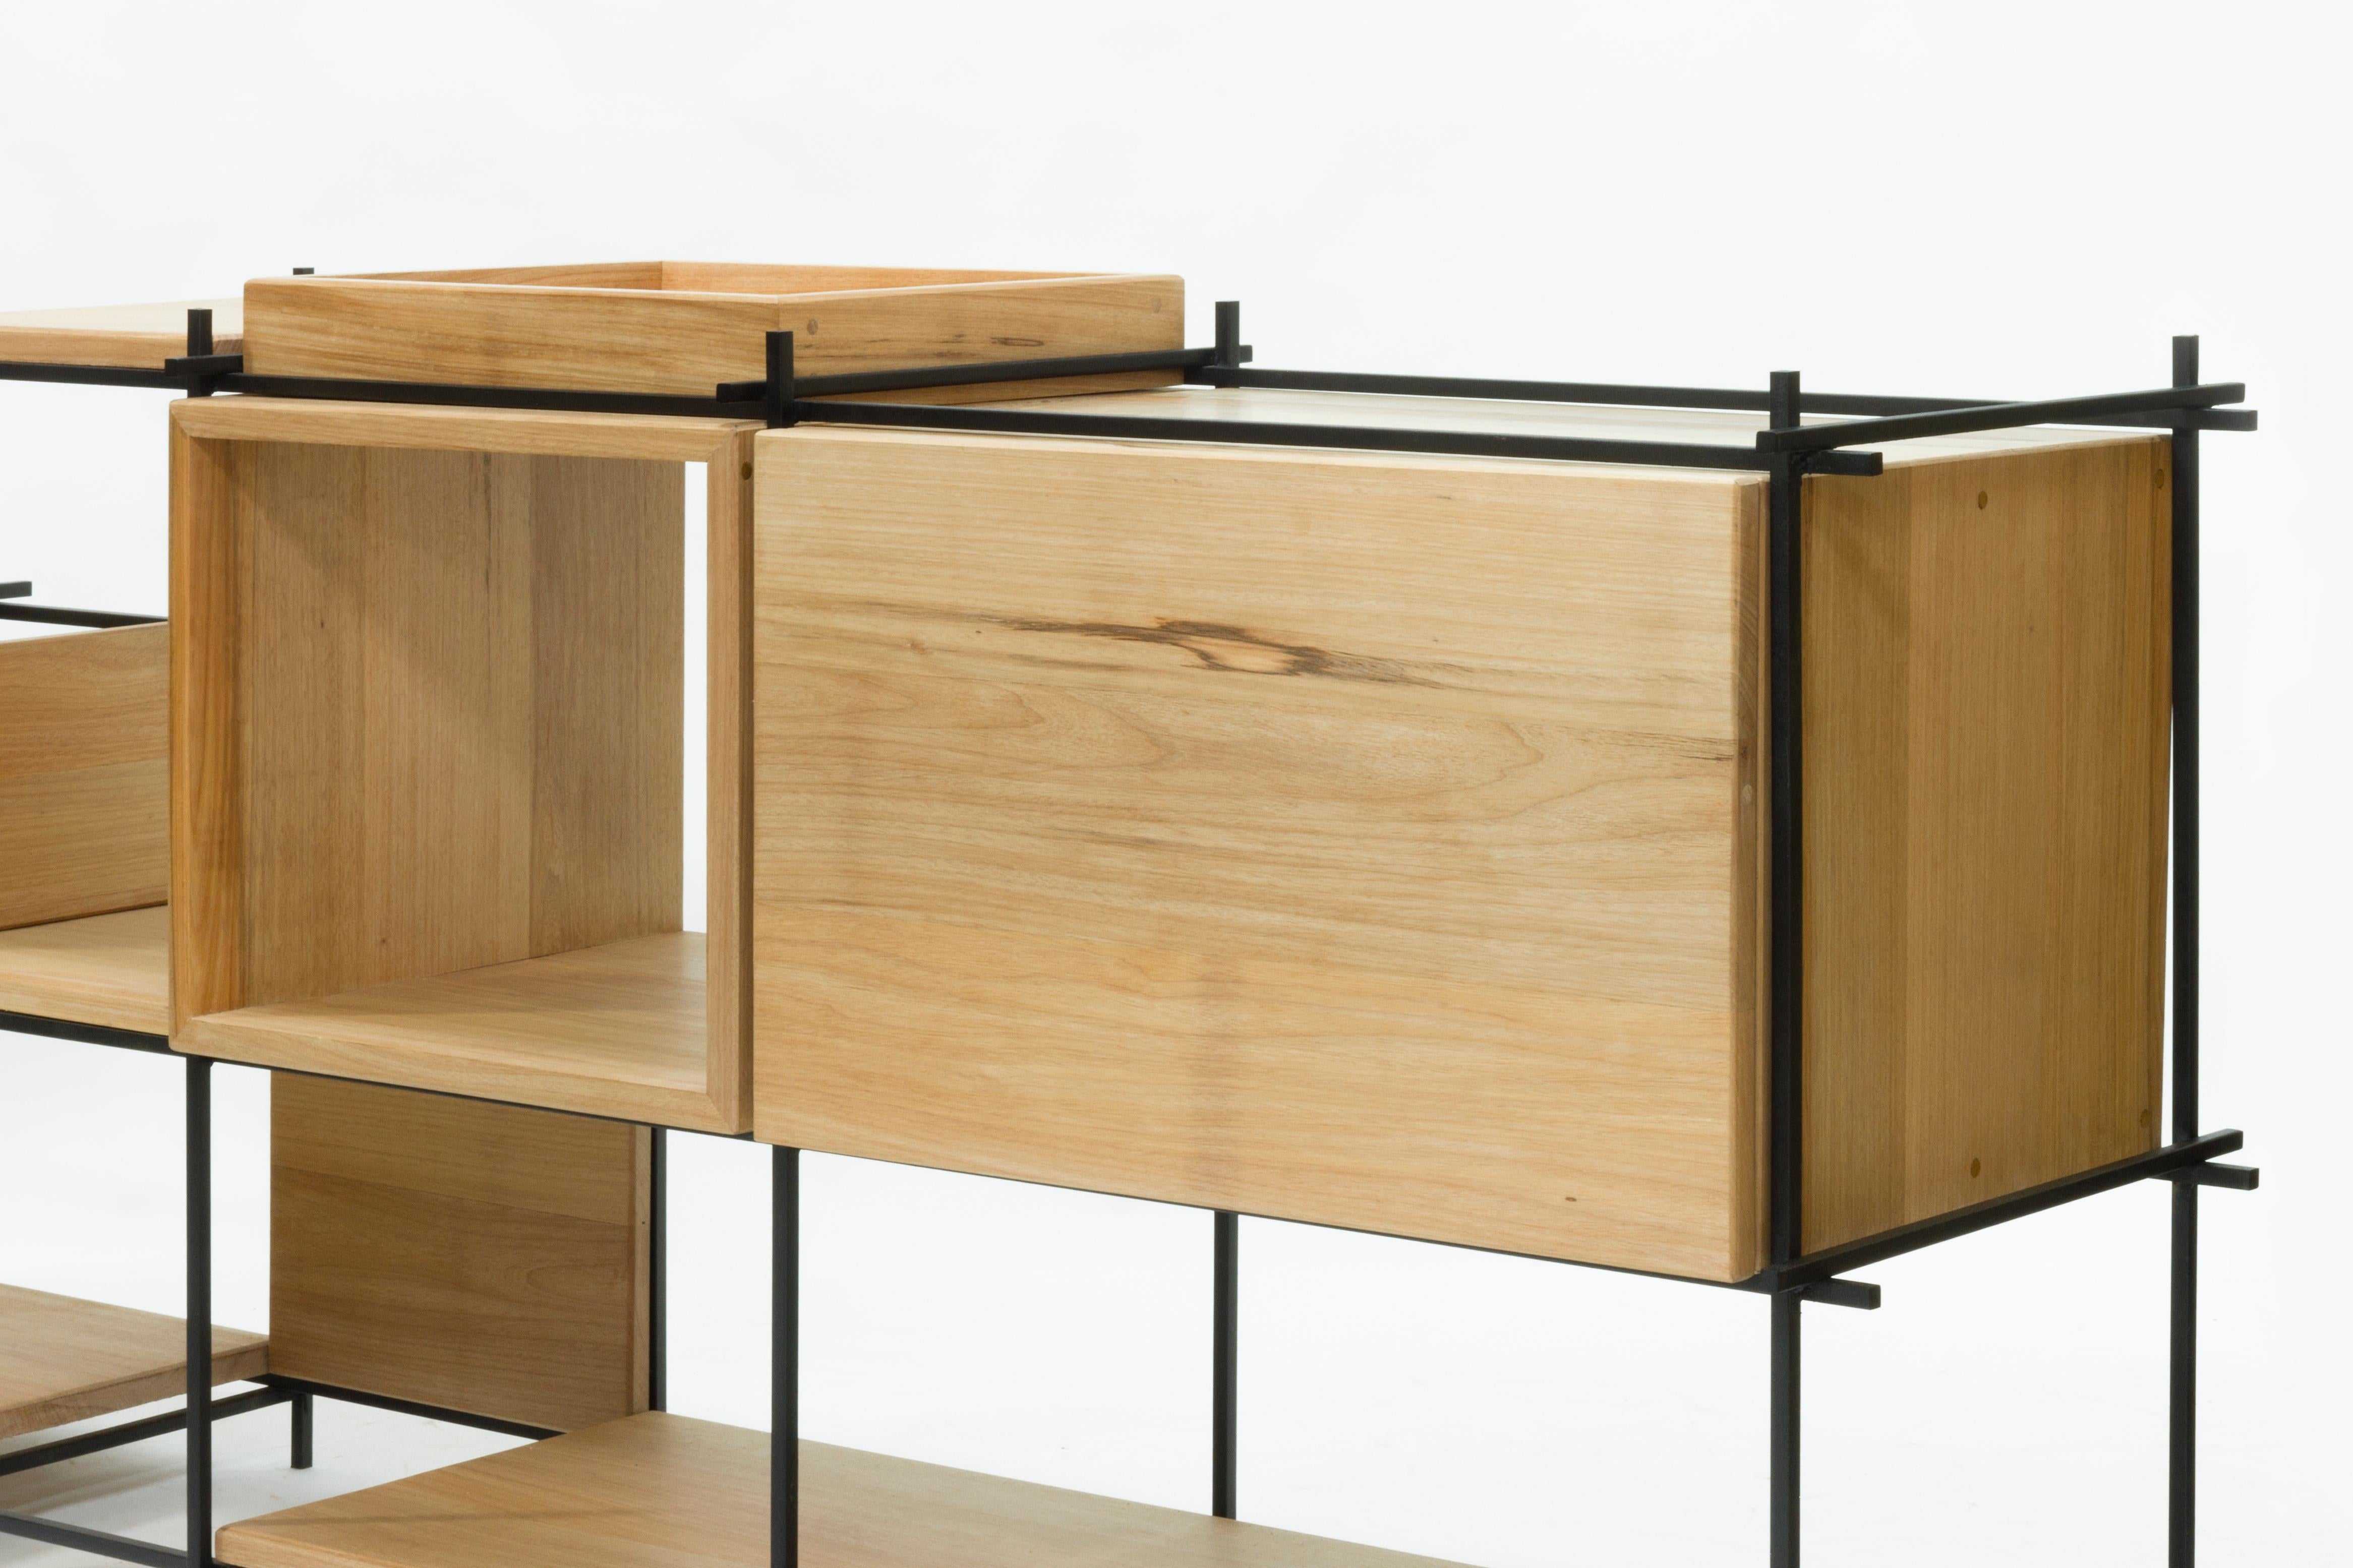 Sideboard in Hardwood and Steel, Brazilian Contemporary Design by O Formigueiro In New Condition For Sale In Rio de Janeiro, RJ